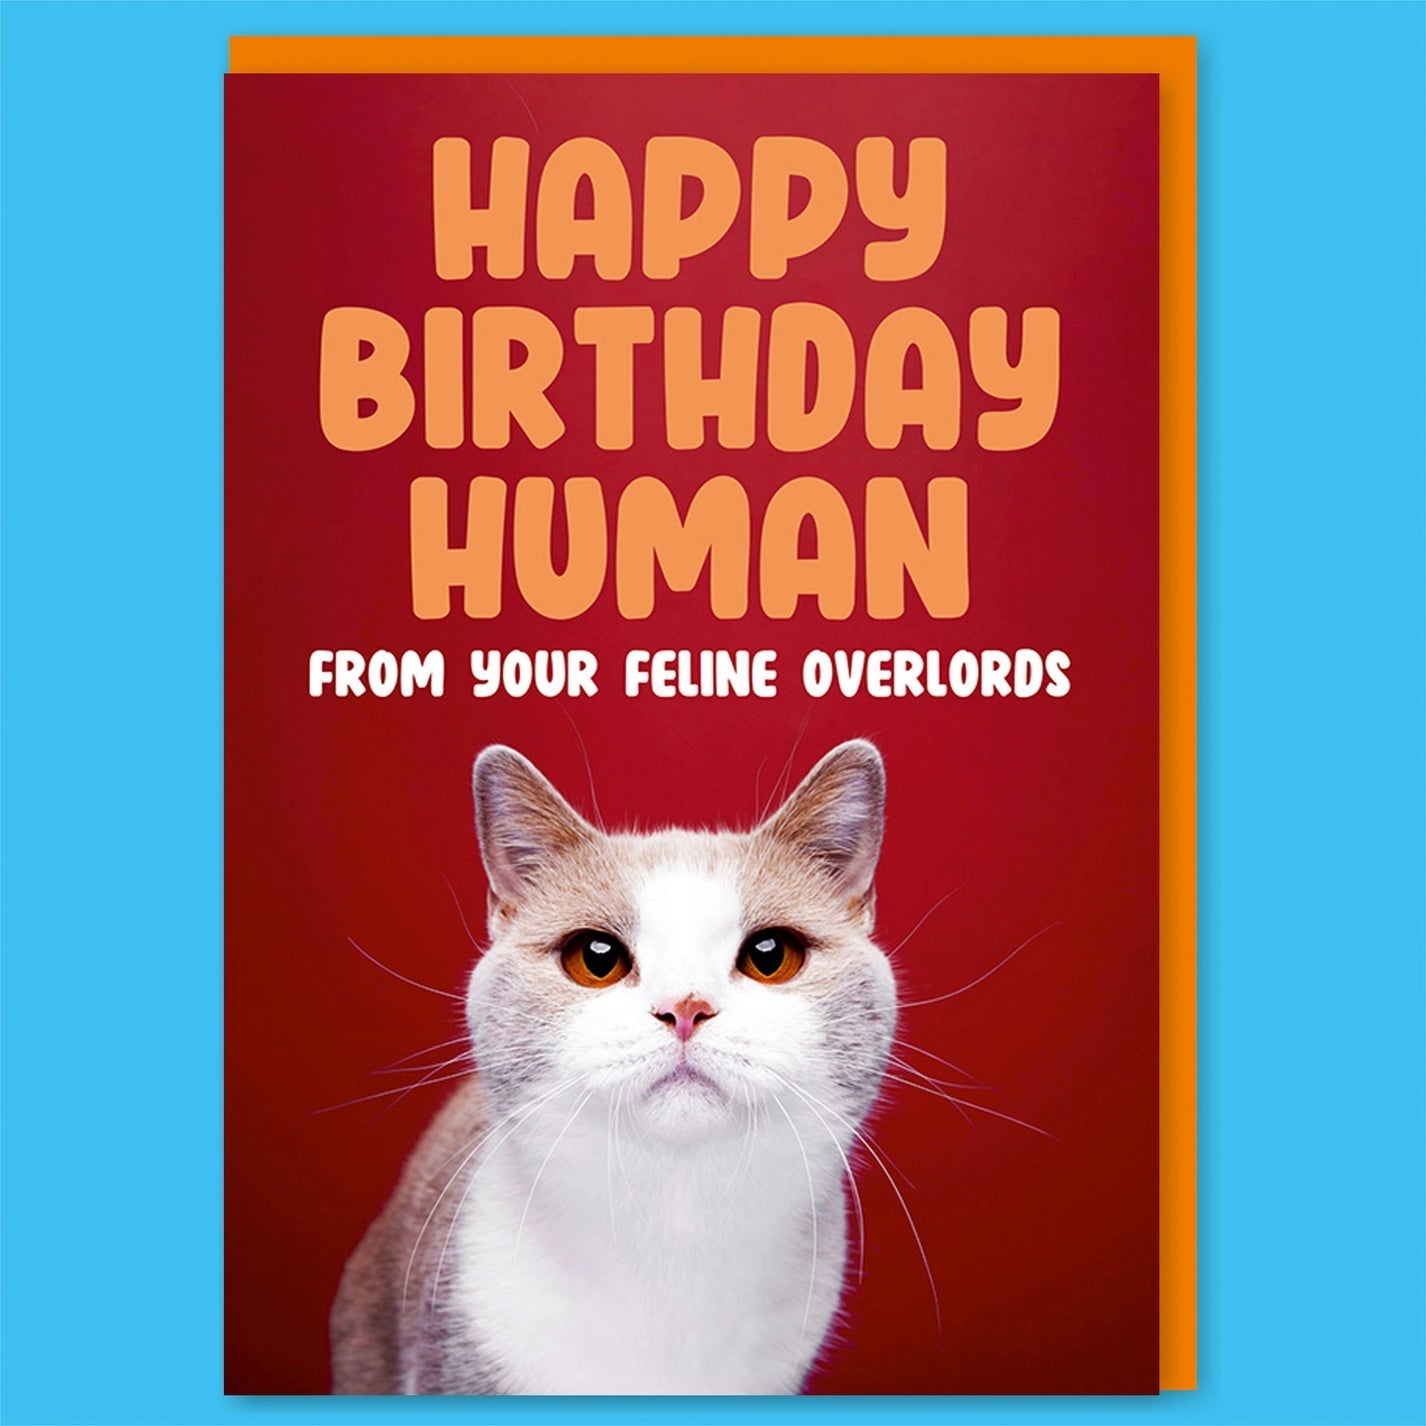 Happy Birthday Human From Your Feline Overlords Greeting Card